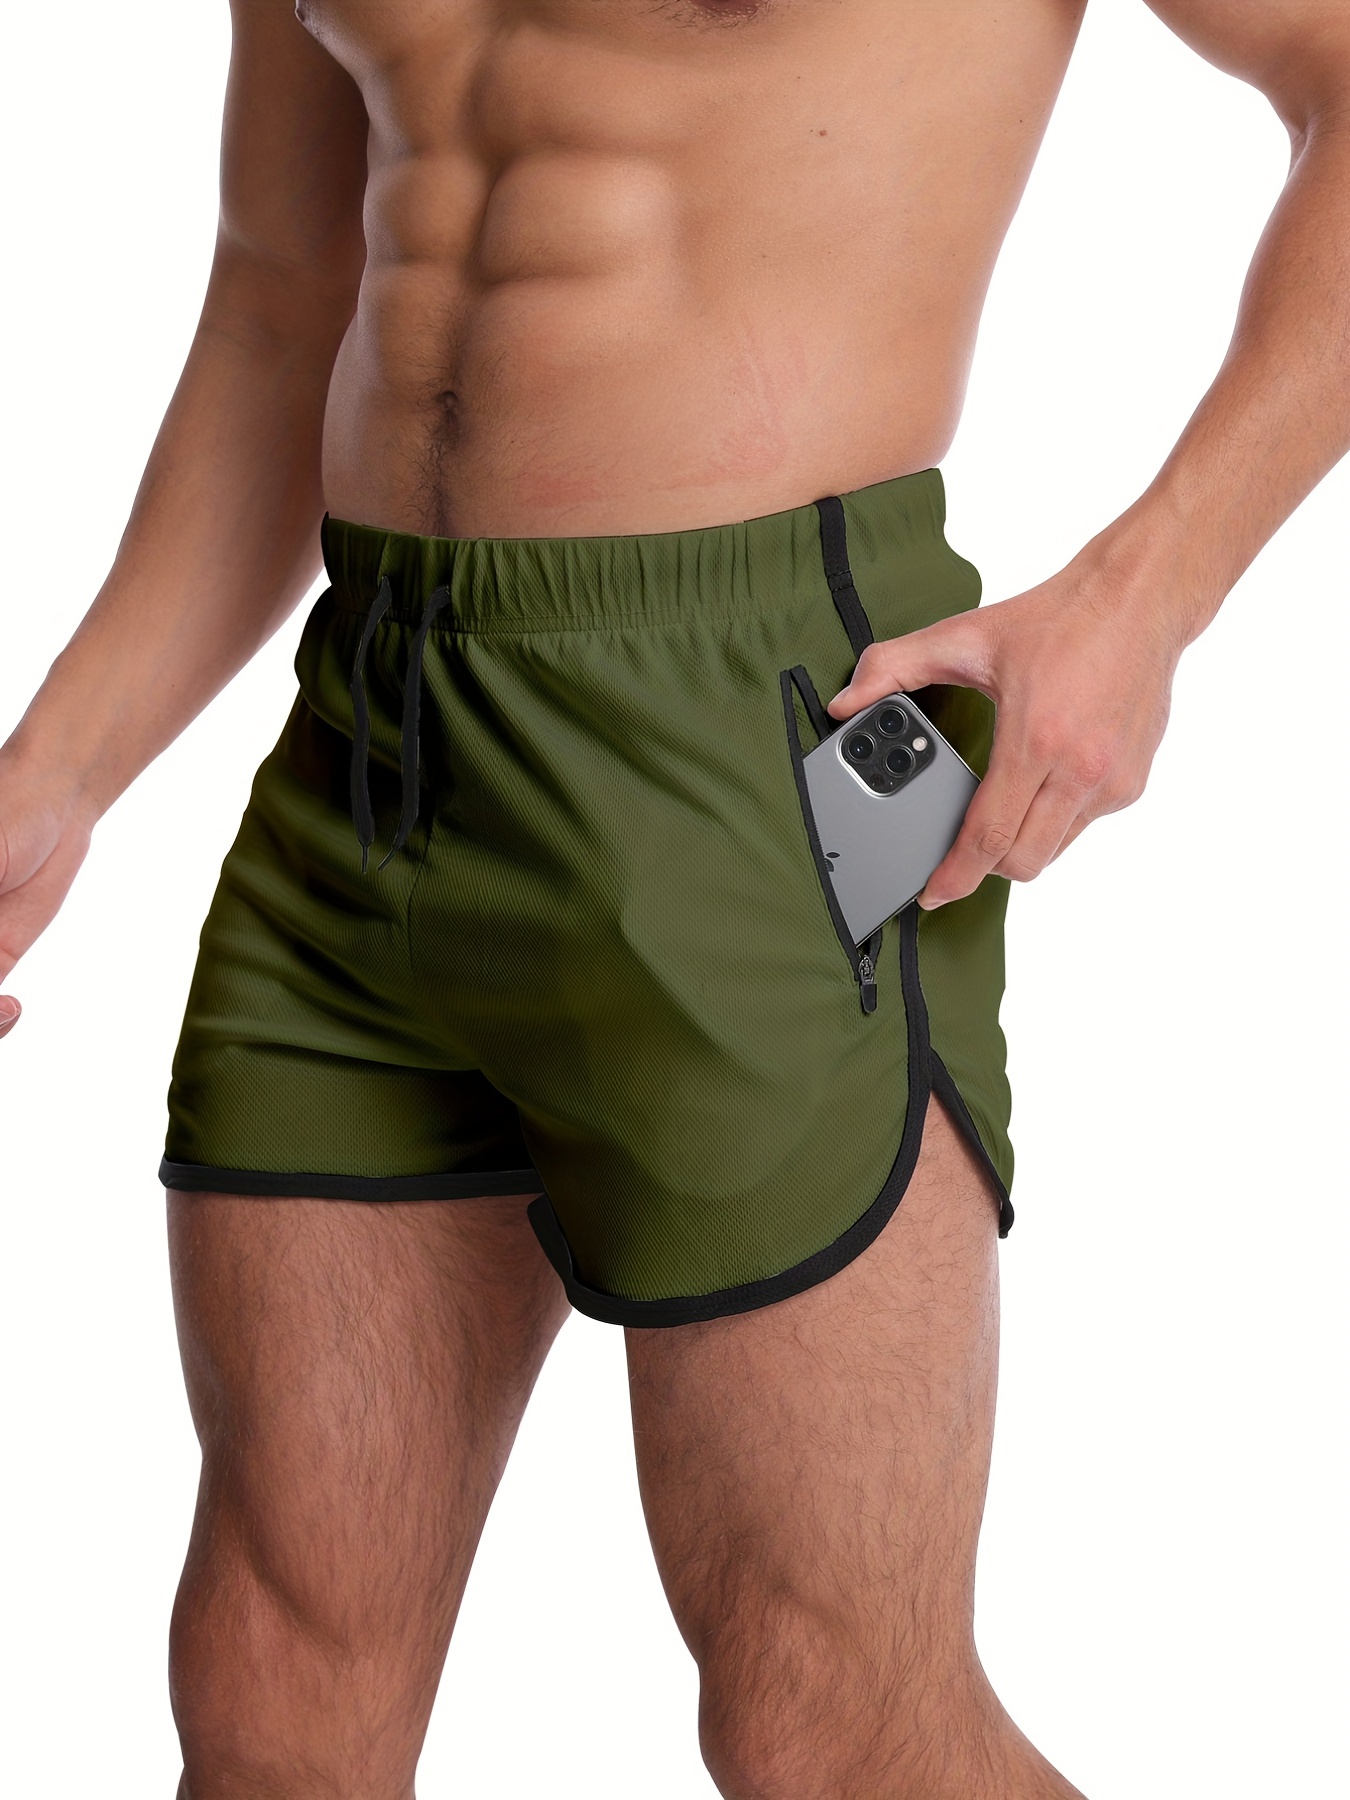 Men's Workout Short  Army Green Shorts for Men